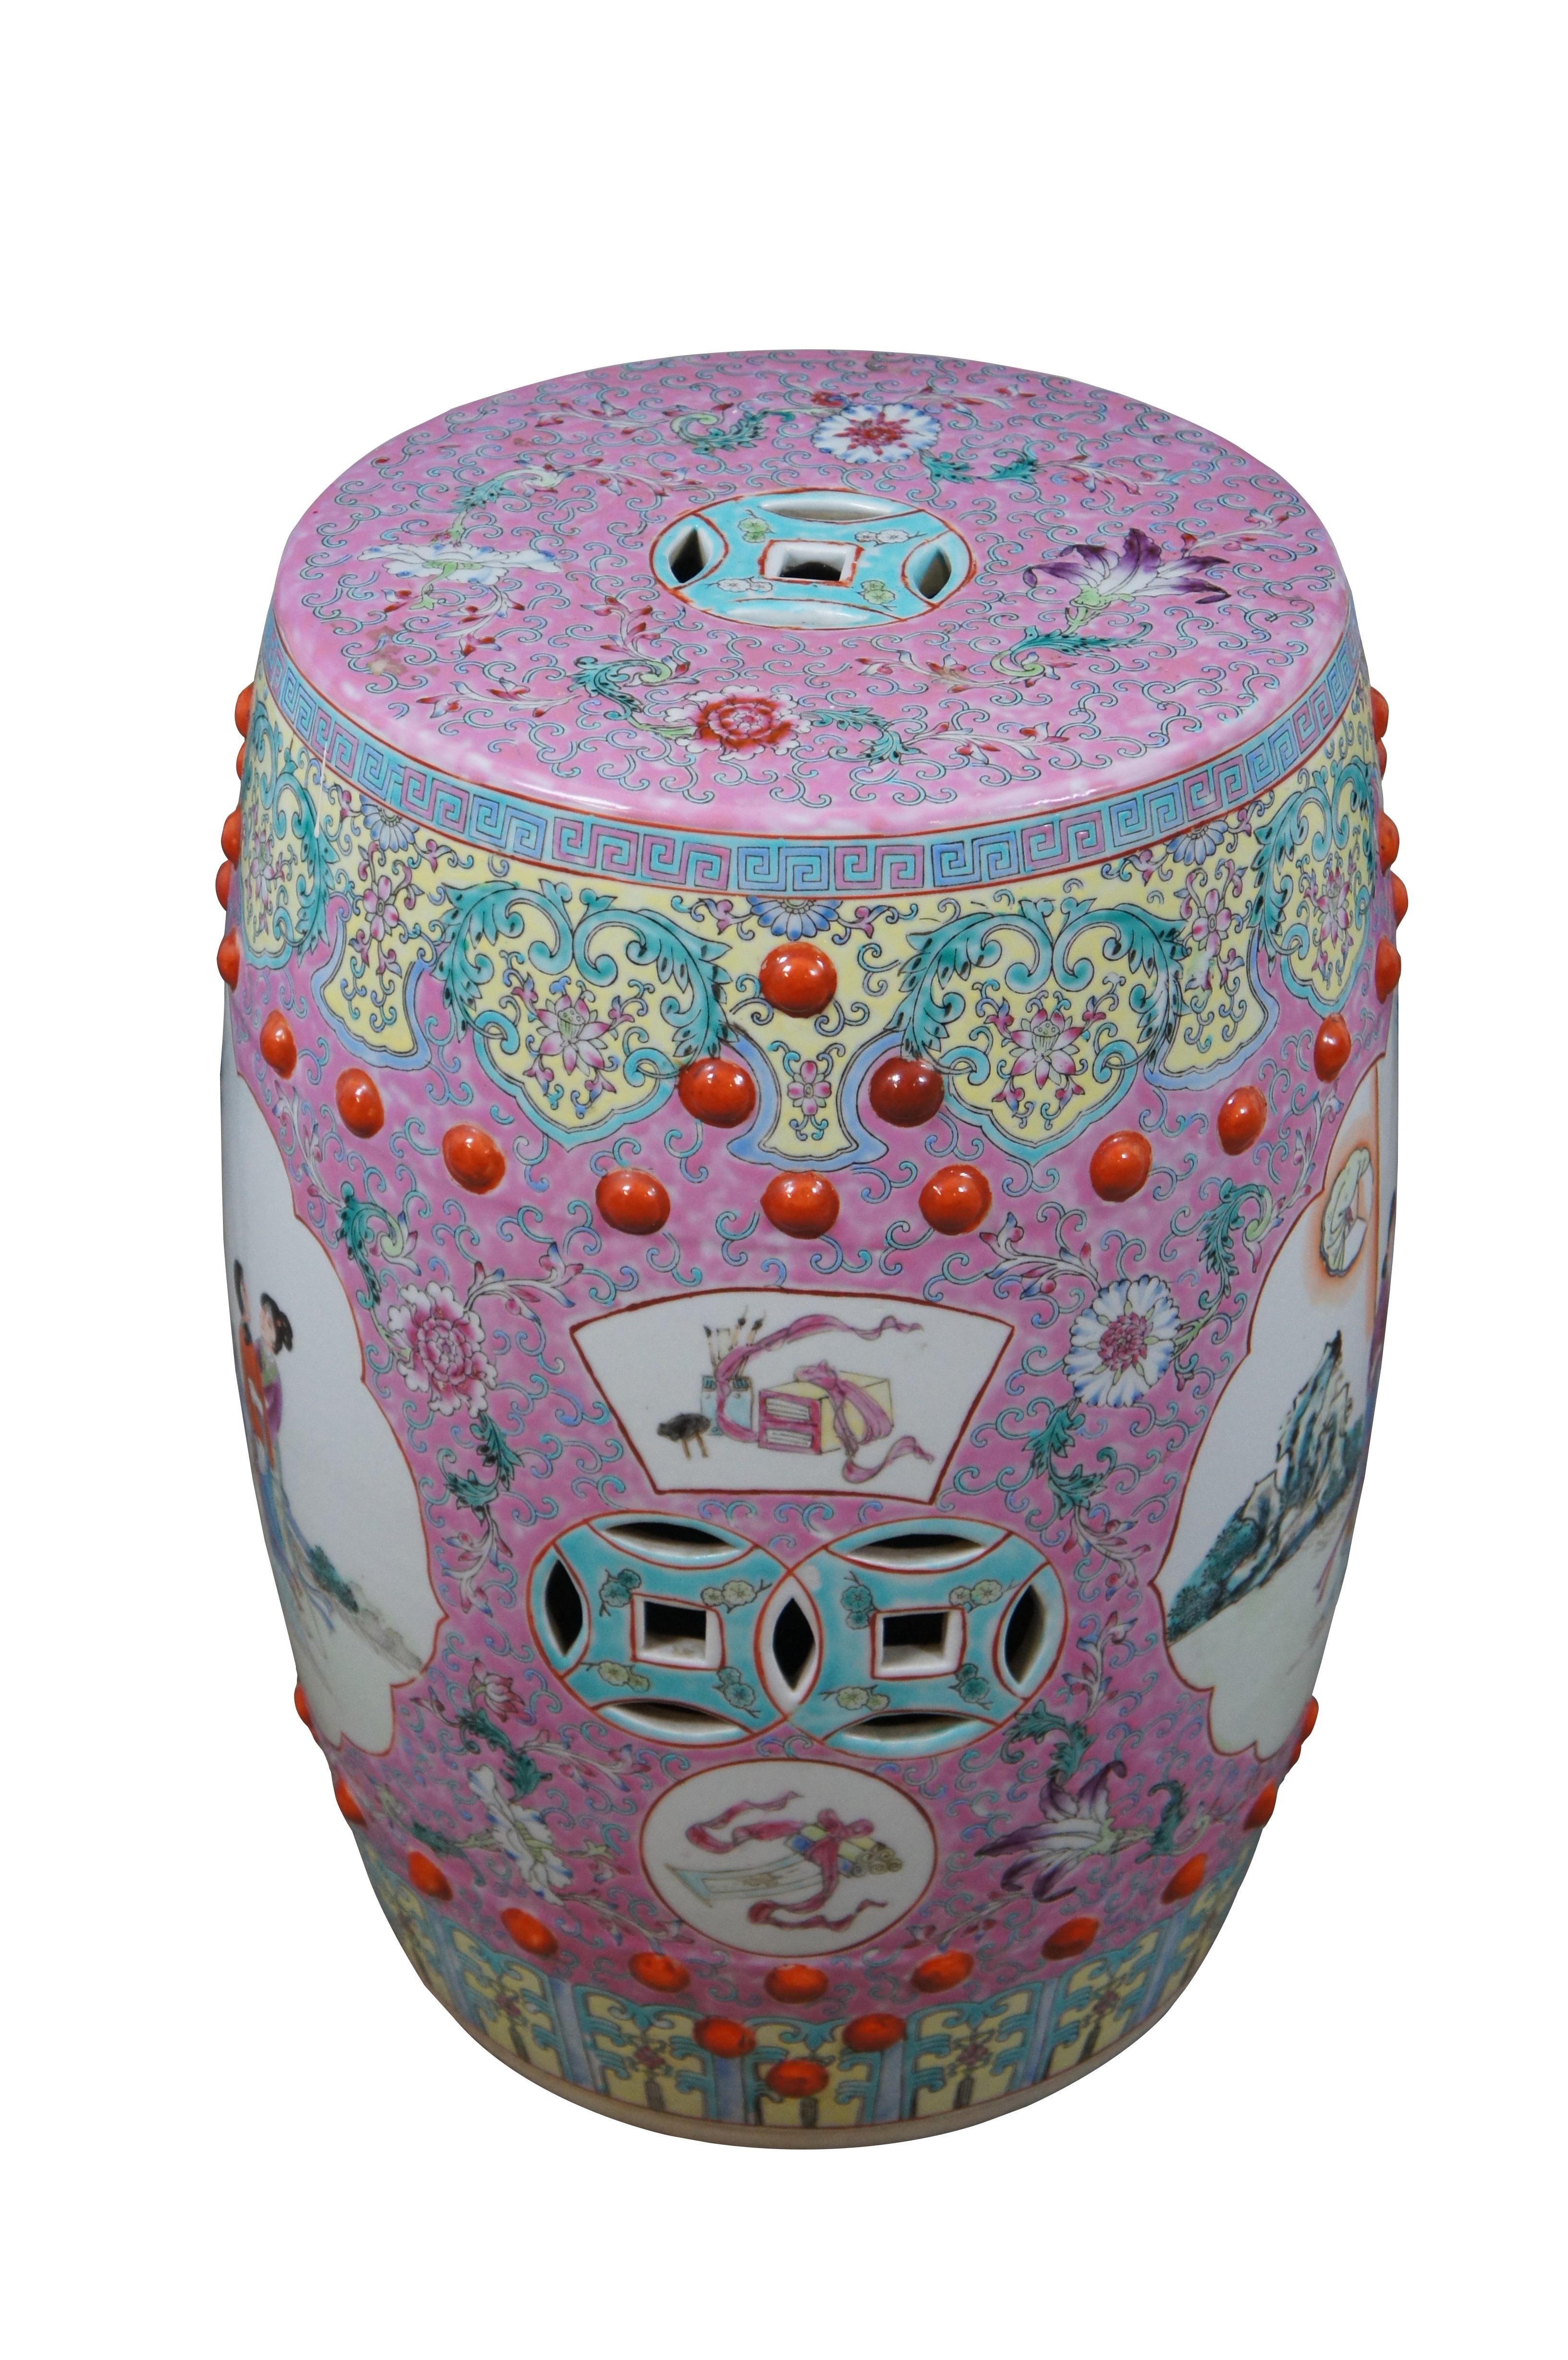 Vintage Chinese Famille Rose bright colorful ceramic garden seat, stool or occasional side table. Features a round and oblong body with the overall shape tapering slightly at the top as well as the bottom. The top of the stool  features a pierced